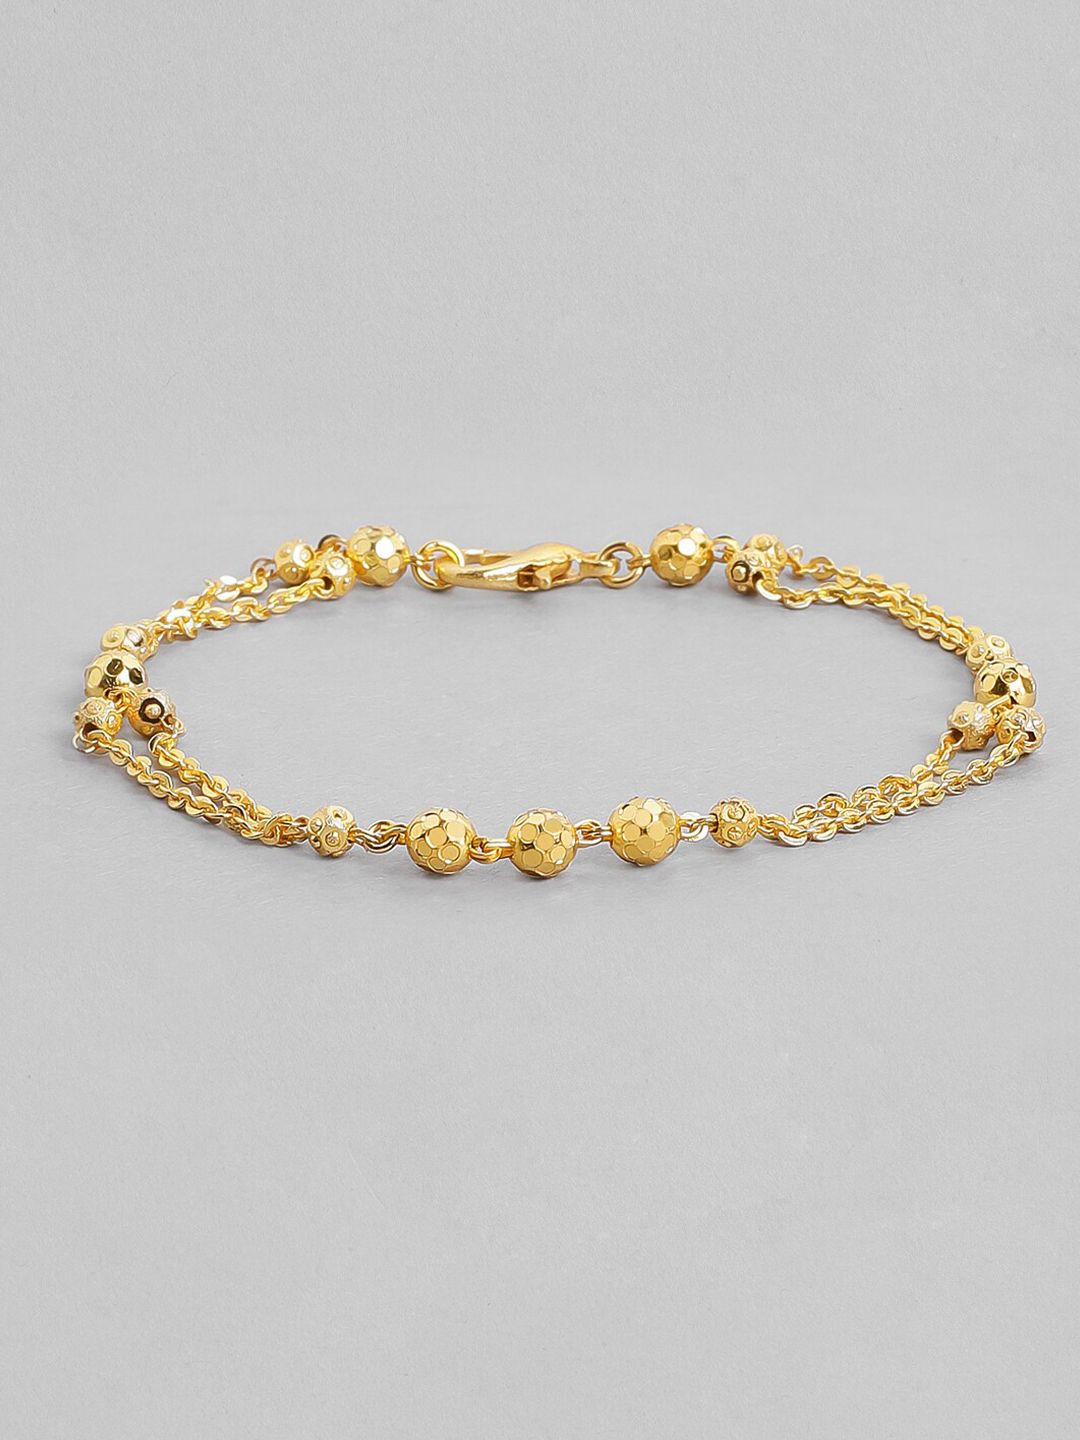 Rubans Women 24K Gold-Toned Handcrafted Filigree Charm Bracelet Price in India